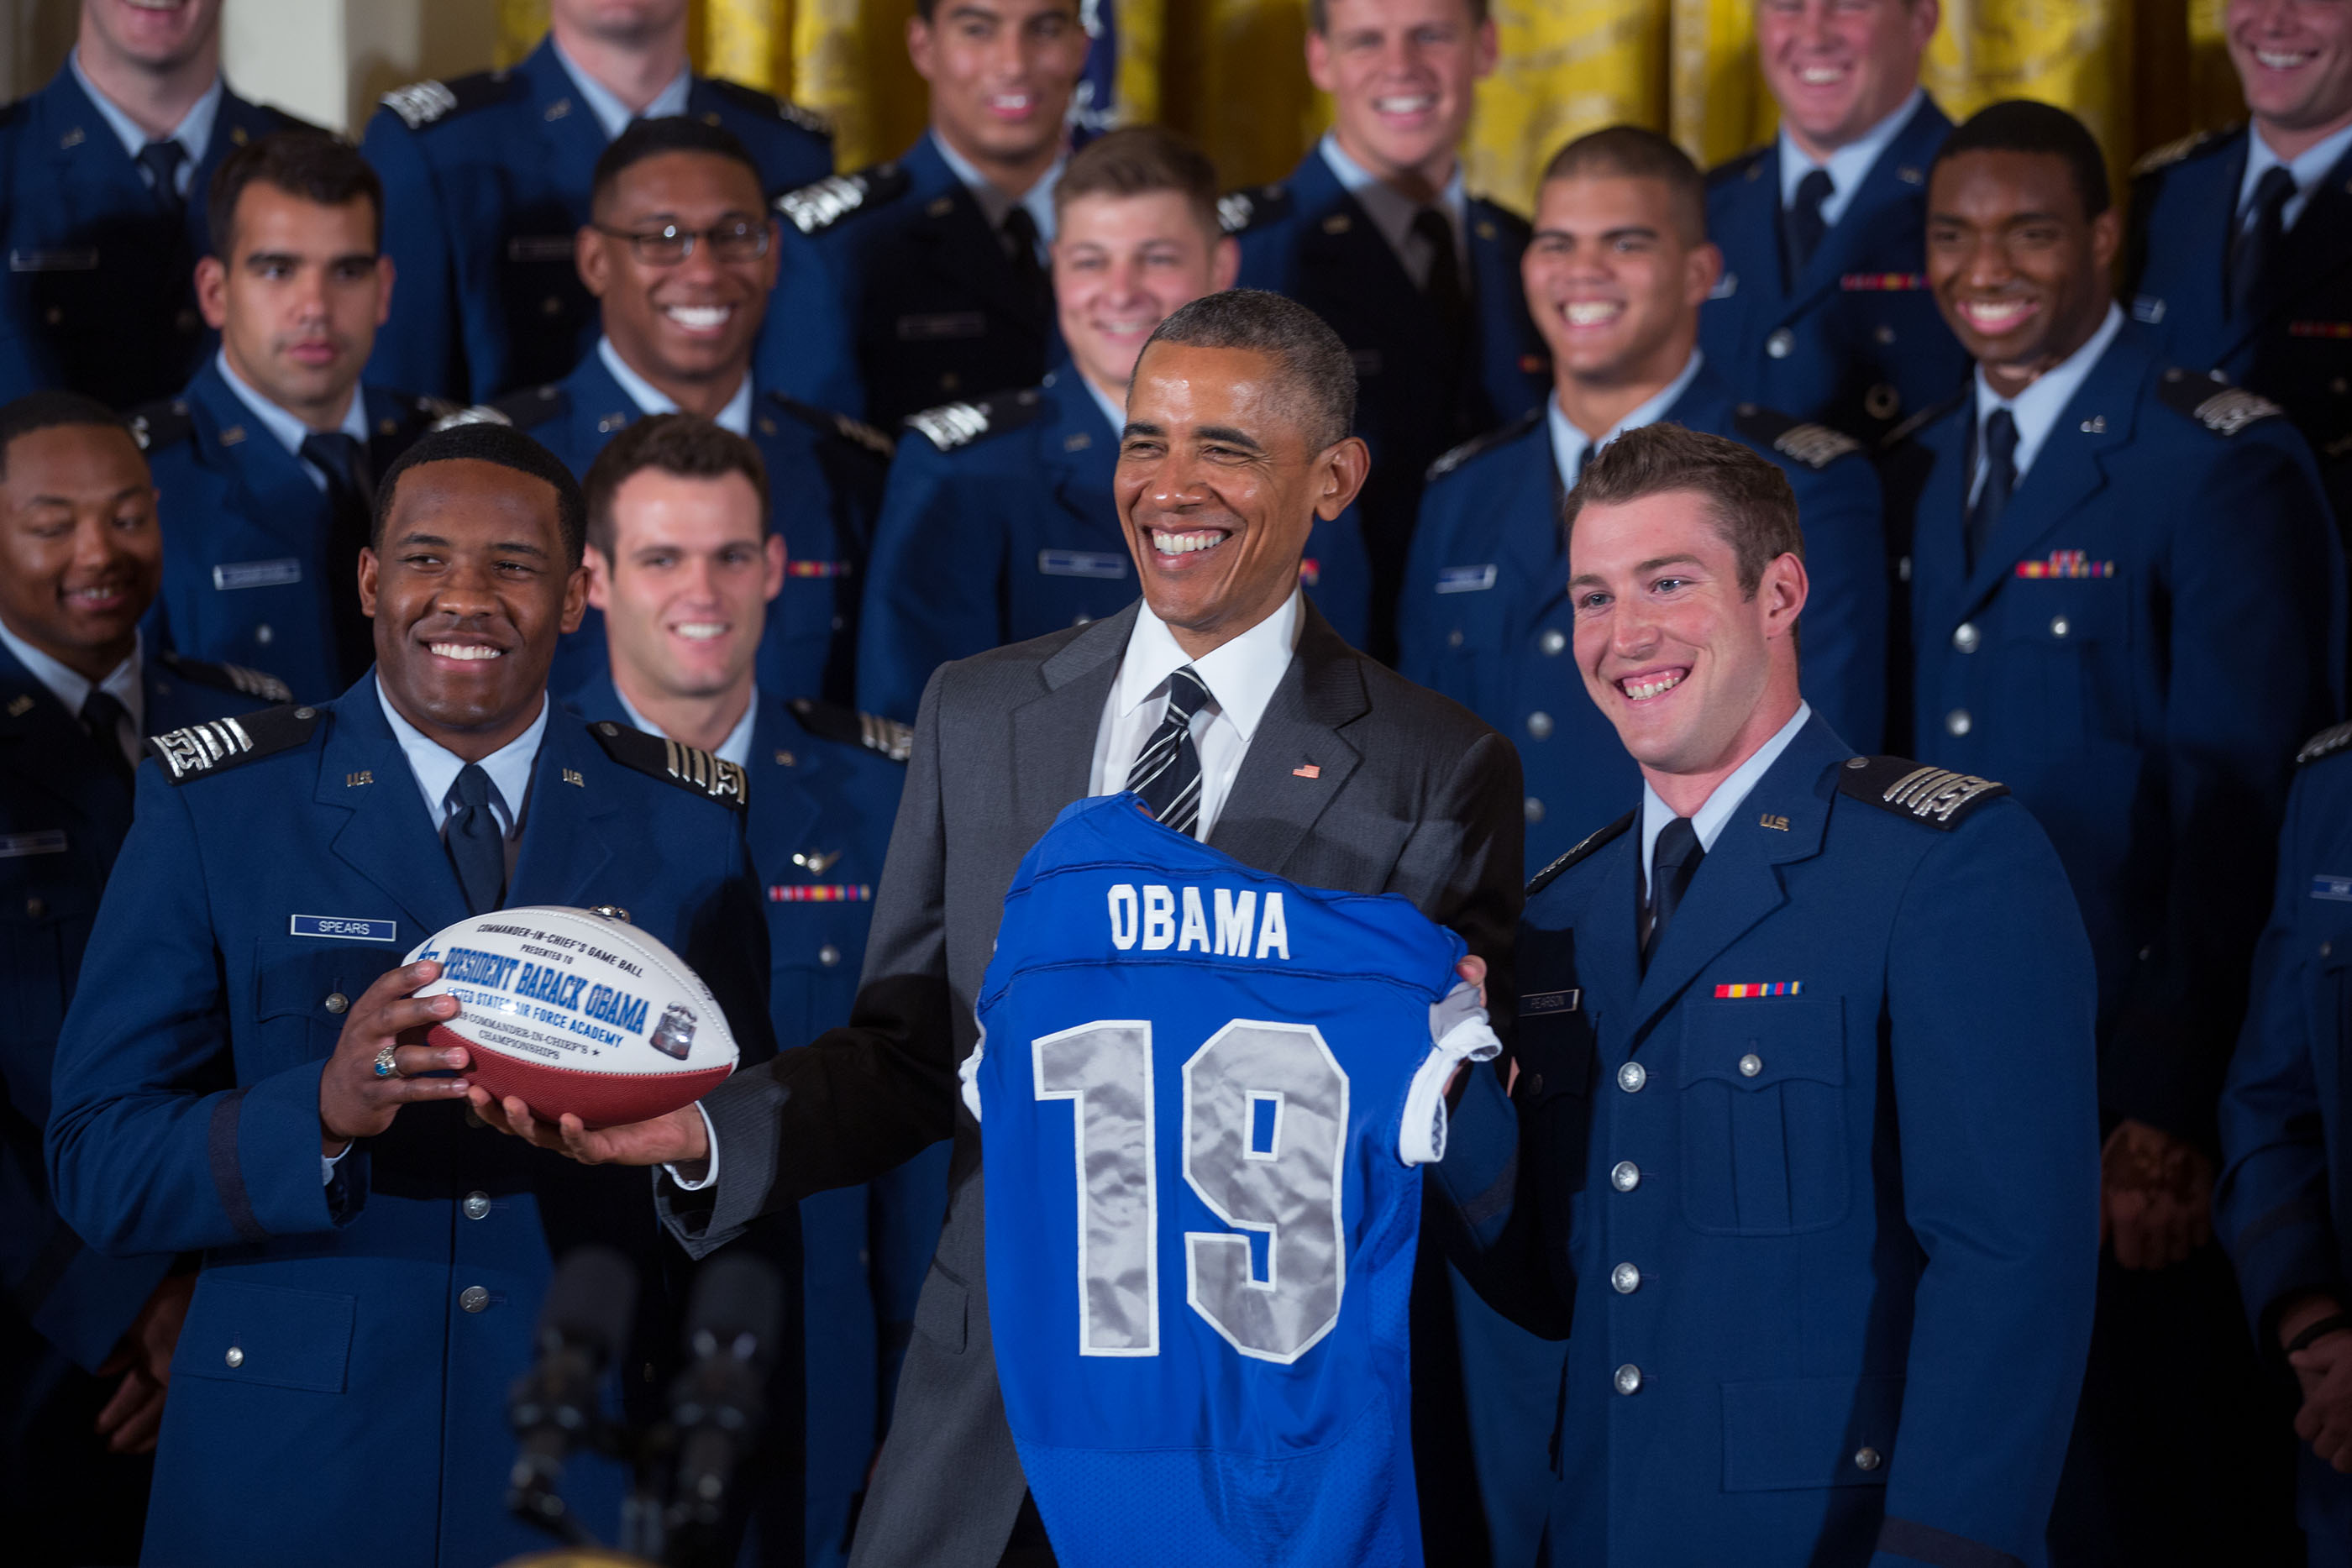 President Obama receiving Commander in Chief Air Force jersey